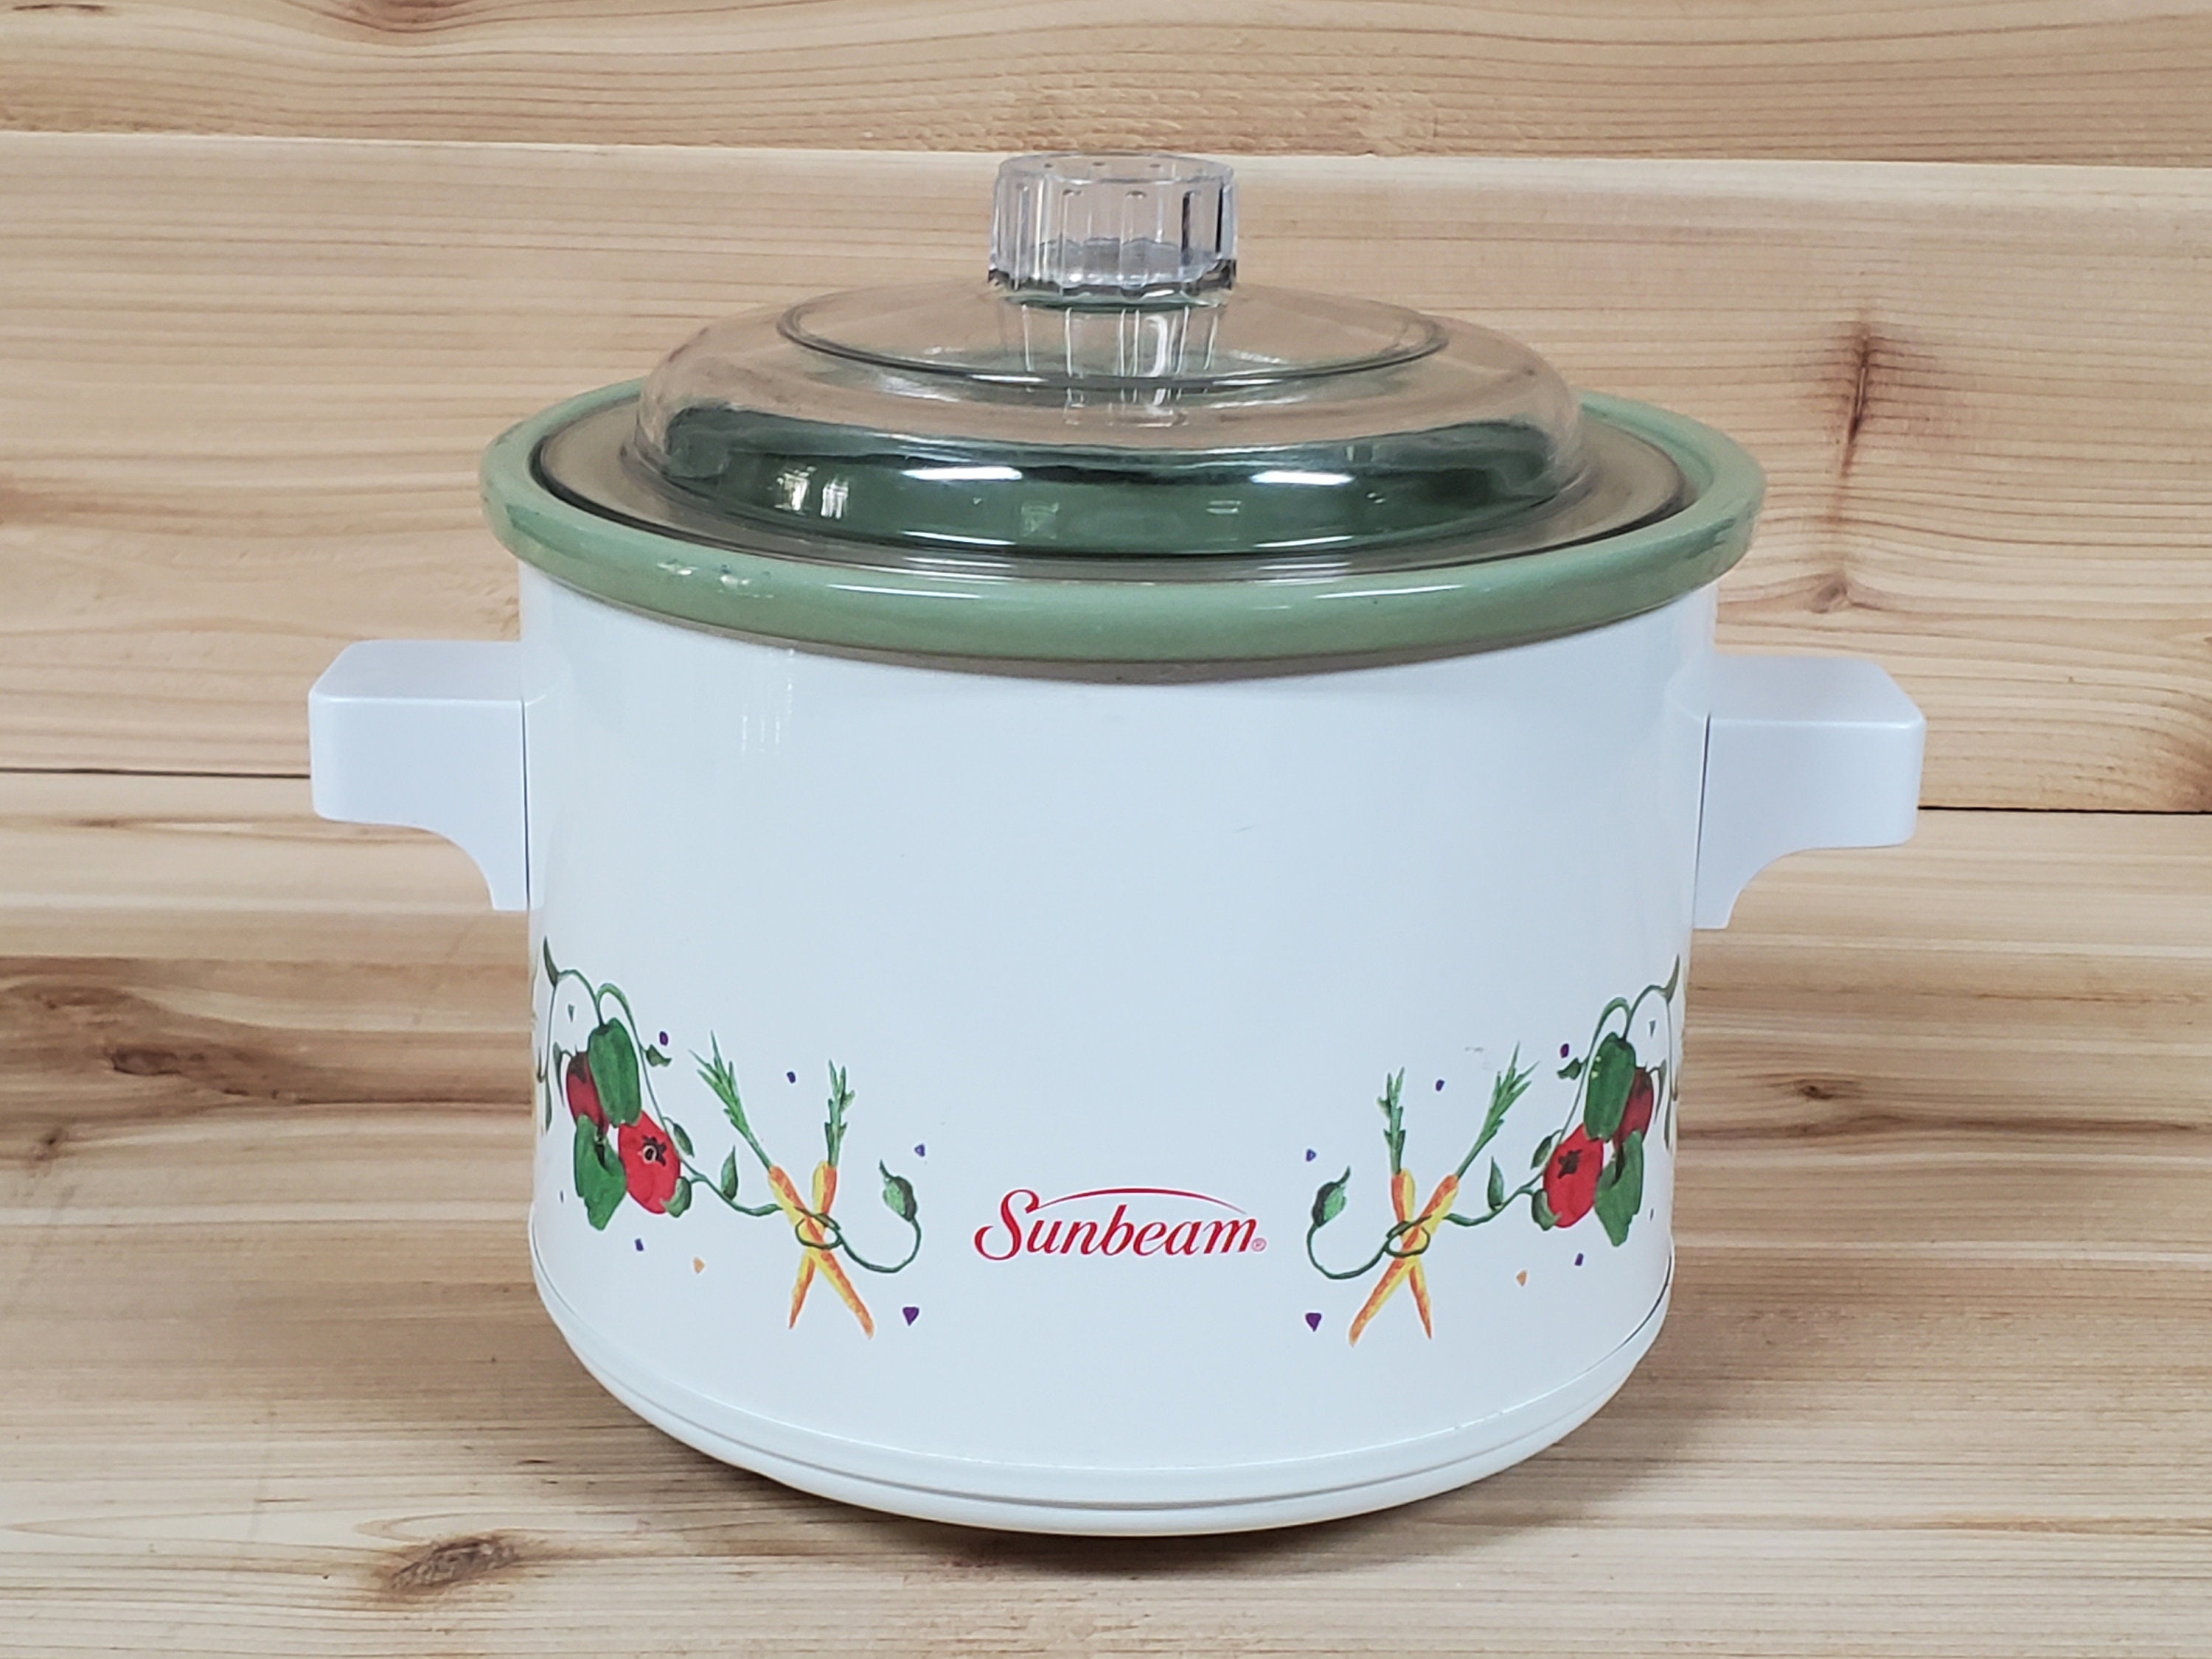 Vintage 1.5 Qt Crock Pot Slow Cooker w/Power Plug by Sunbeam; White w/Green  Line, Vegetable Band Around Base; 60 Watts 120V Small Crockpot